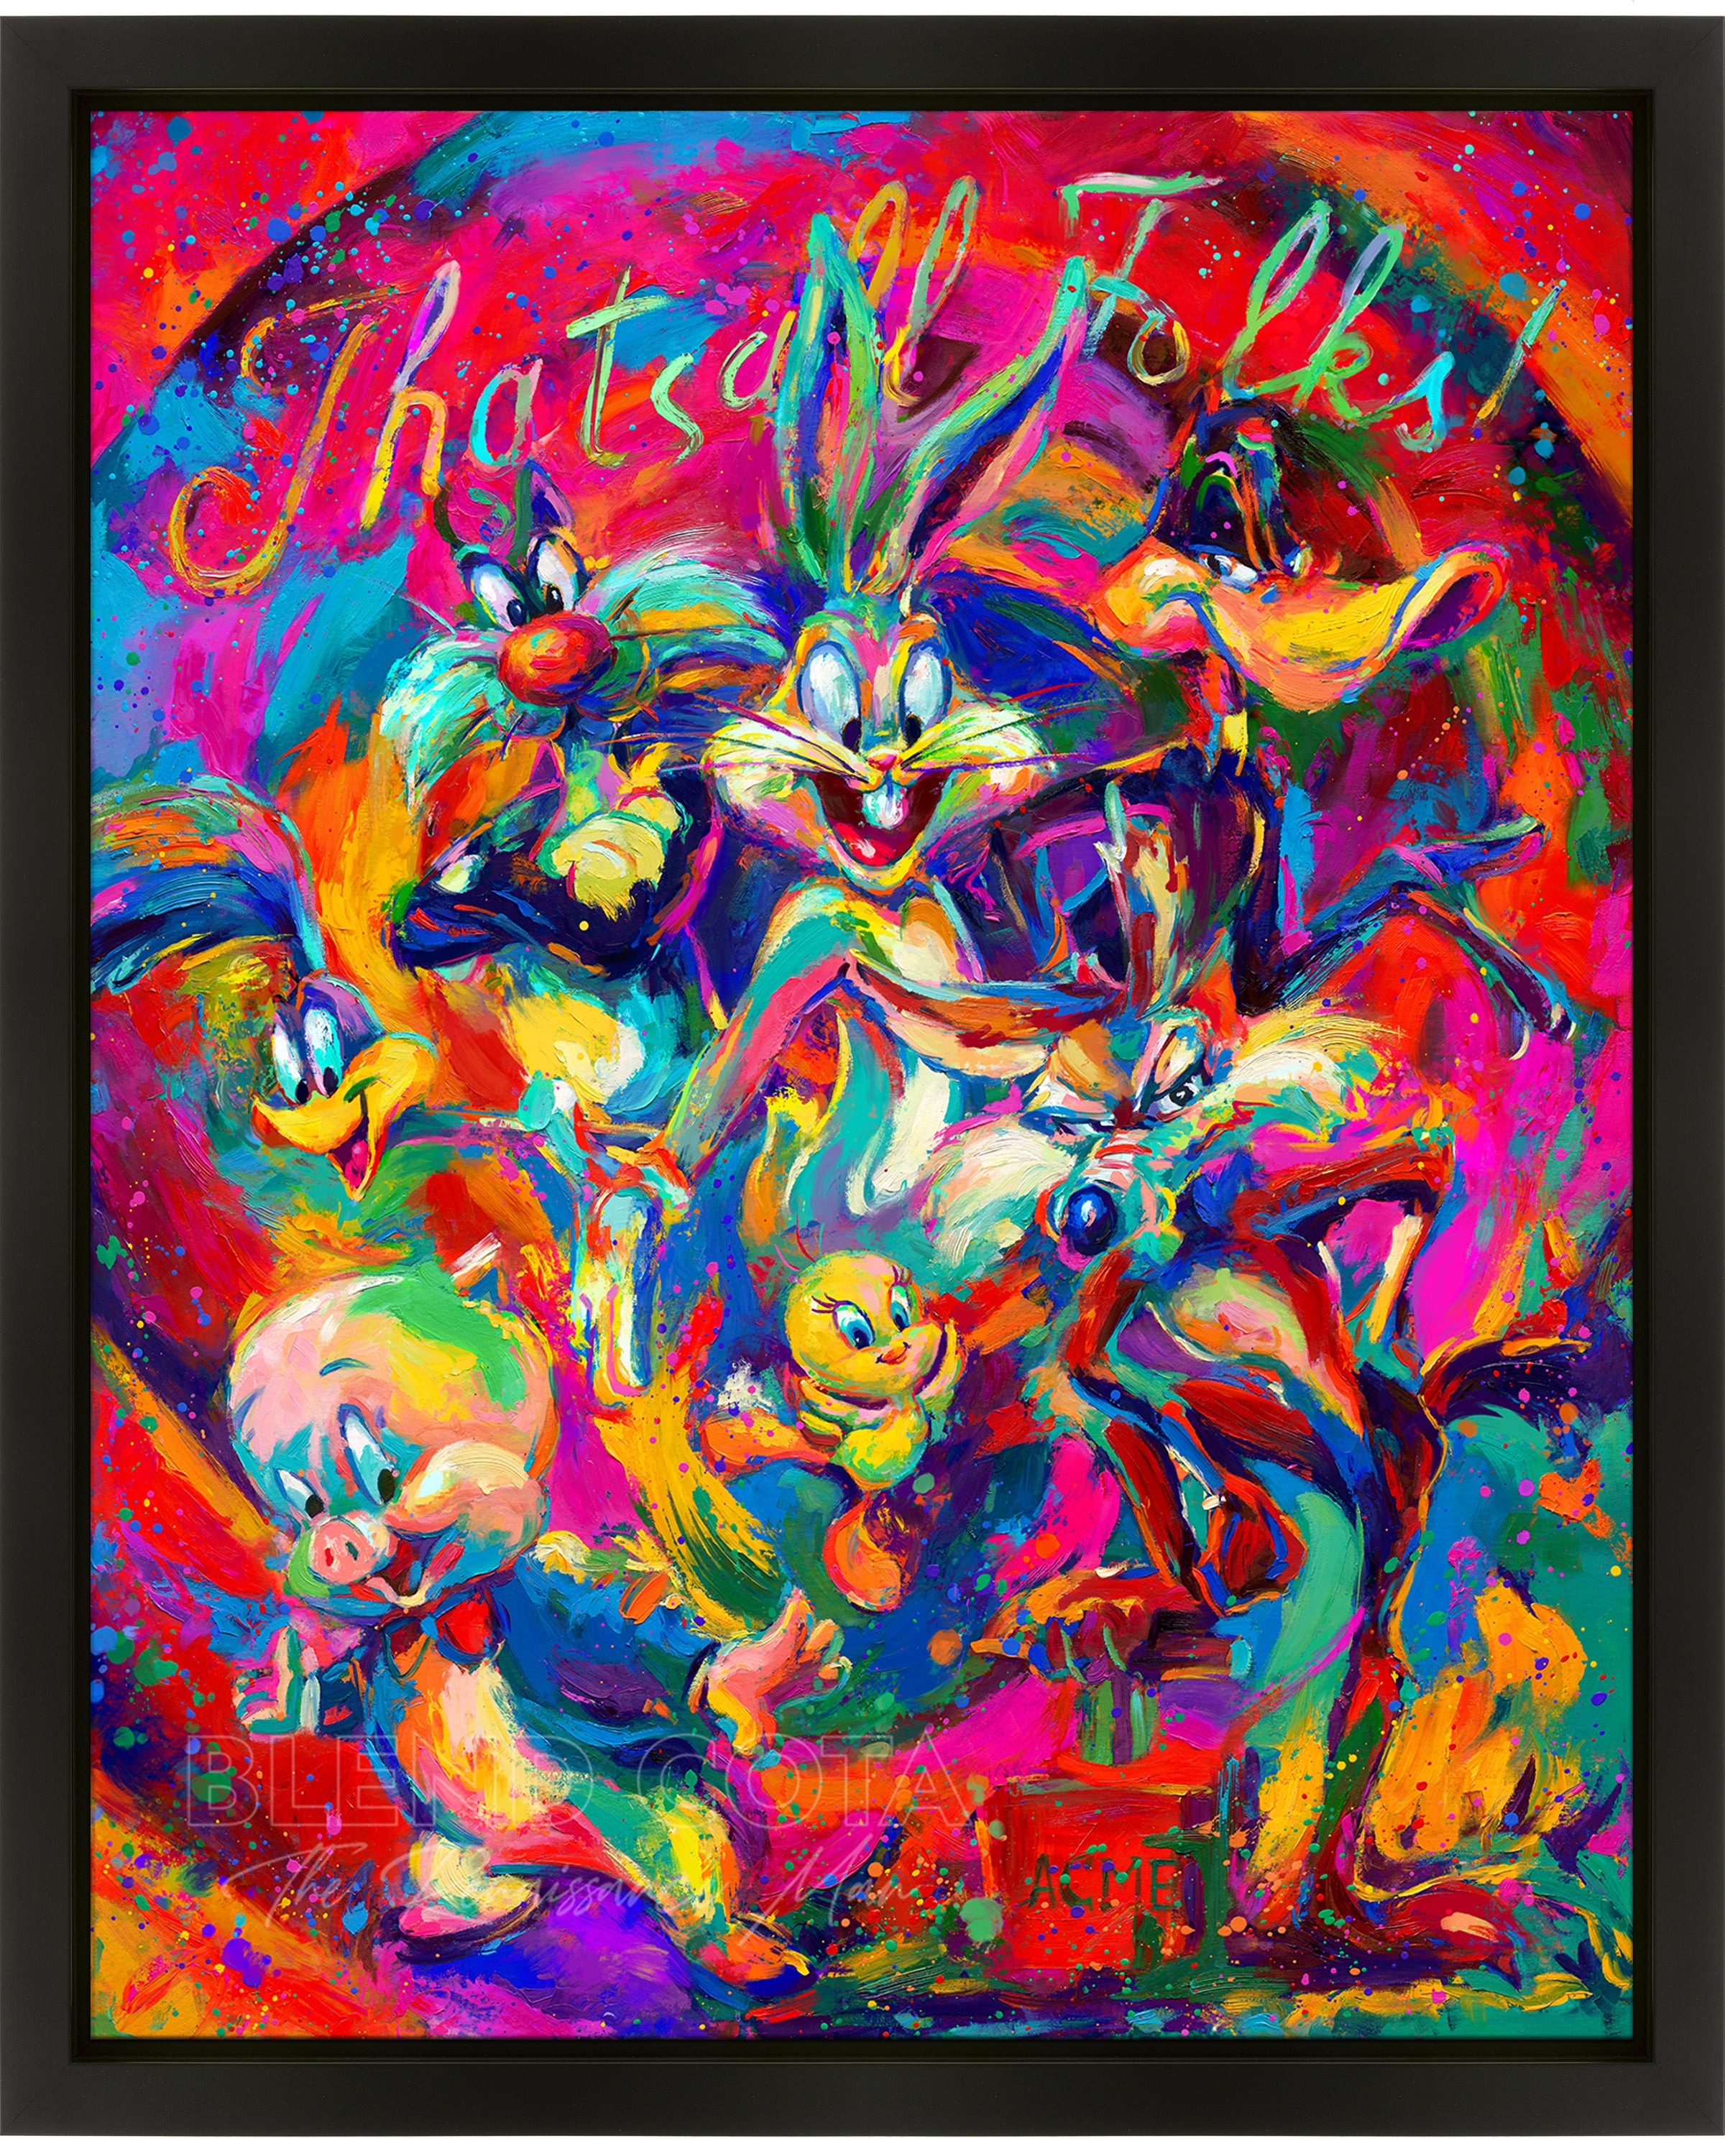 Oil on canvas original painting of the Warner Brother's cast of Looney Tunes characters, from Bugs Bunny, Wile E. Coyote, Daffy Duck and Tweety to Road Runner, Porky Pig and Sylvester, they are all together swirling in color while That's All Folks reads behind them, in colorful brushstrokes, color expressionism style.